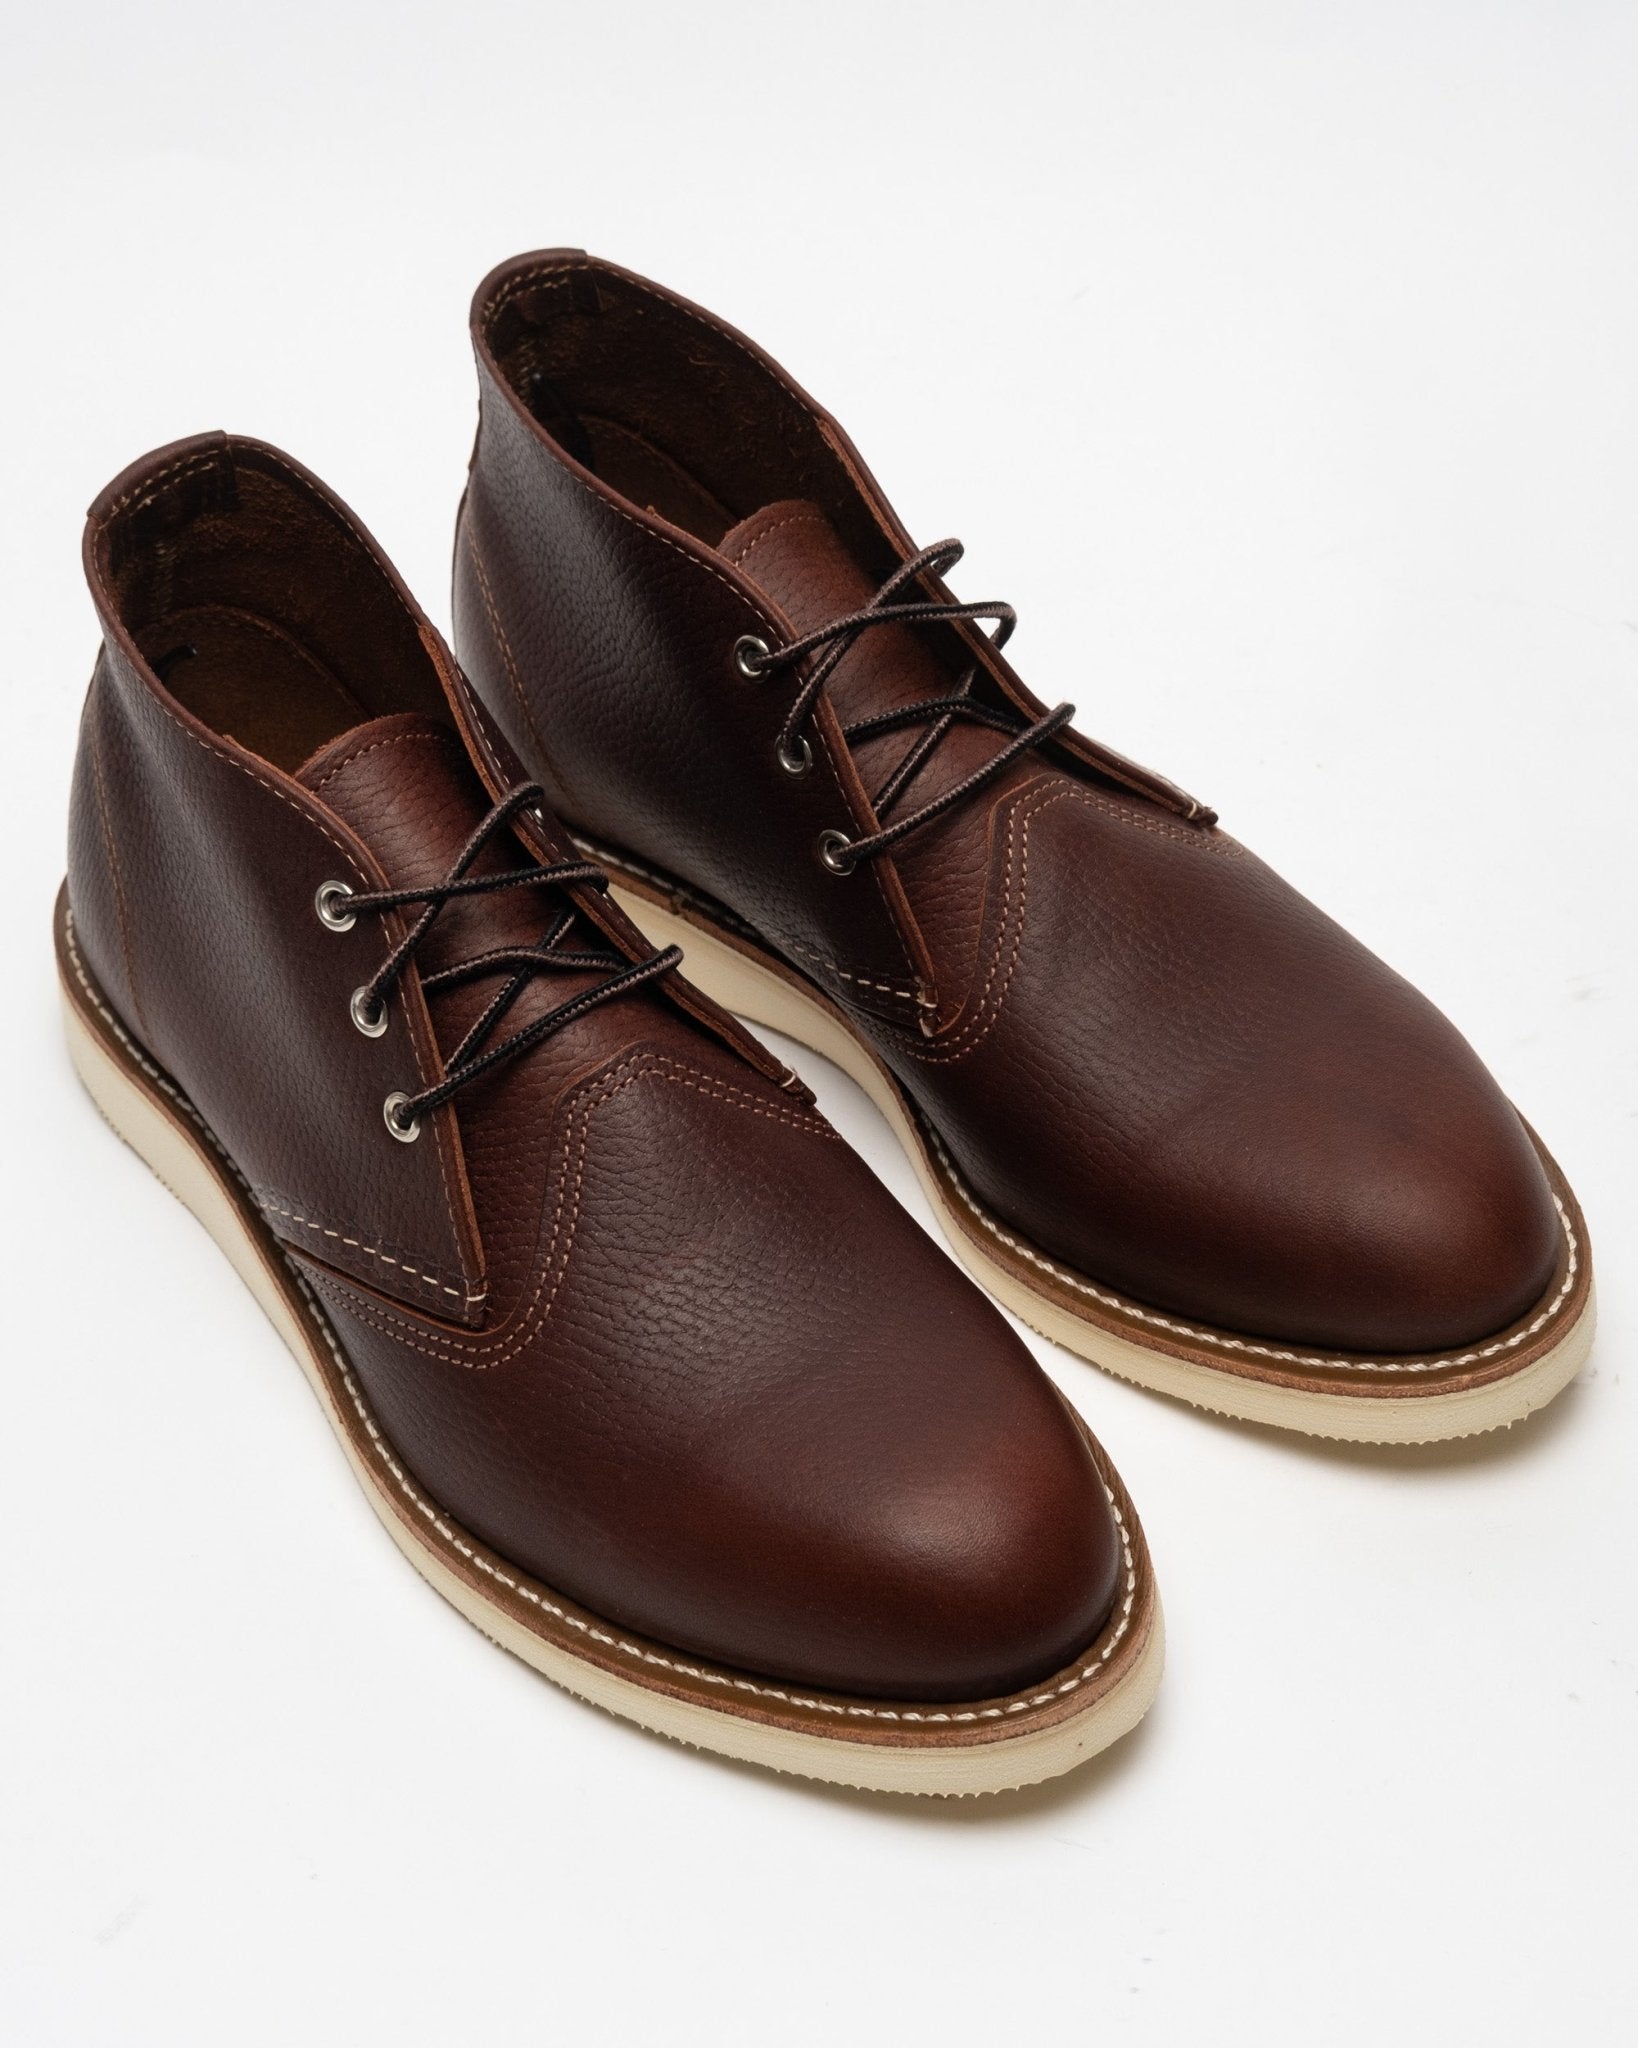 3141 Work Chukka Brial Oil Slick Leather - Meadow